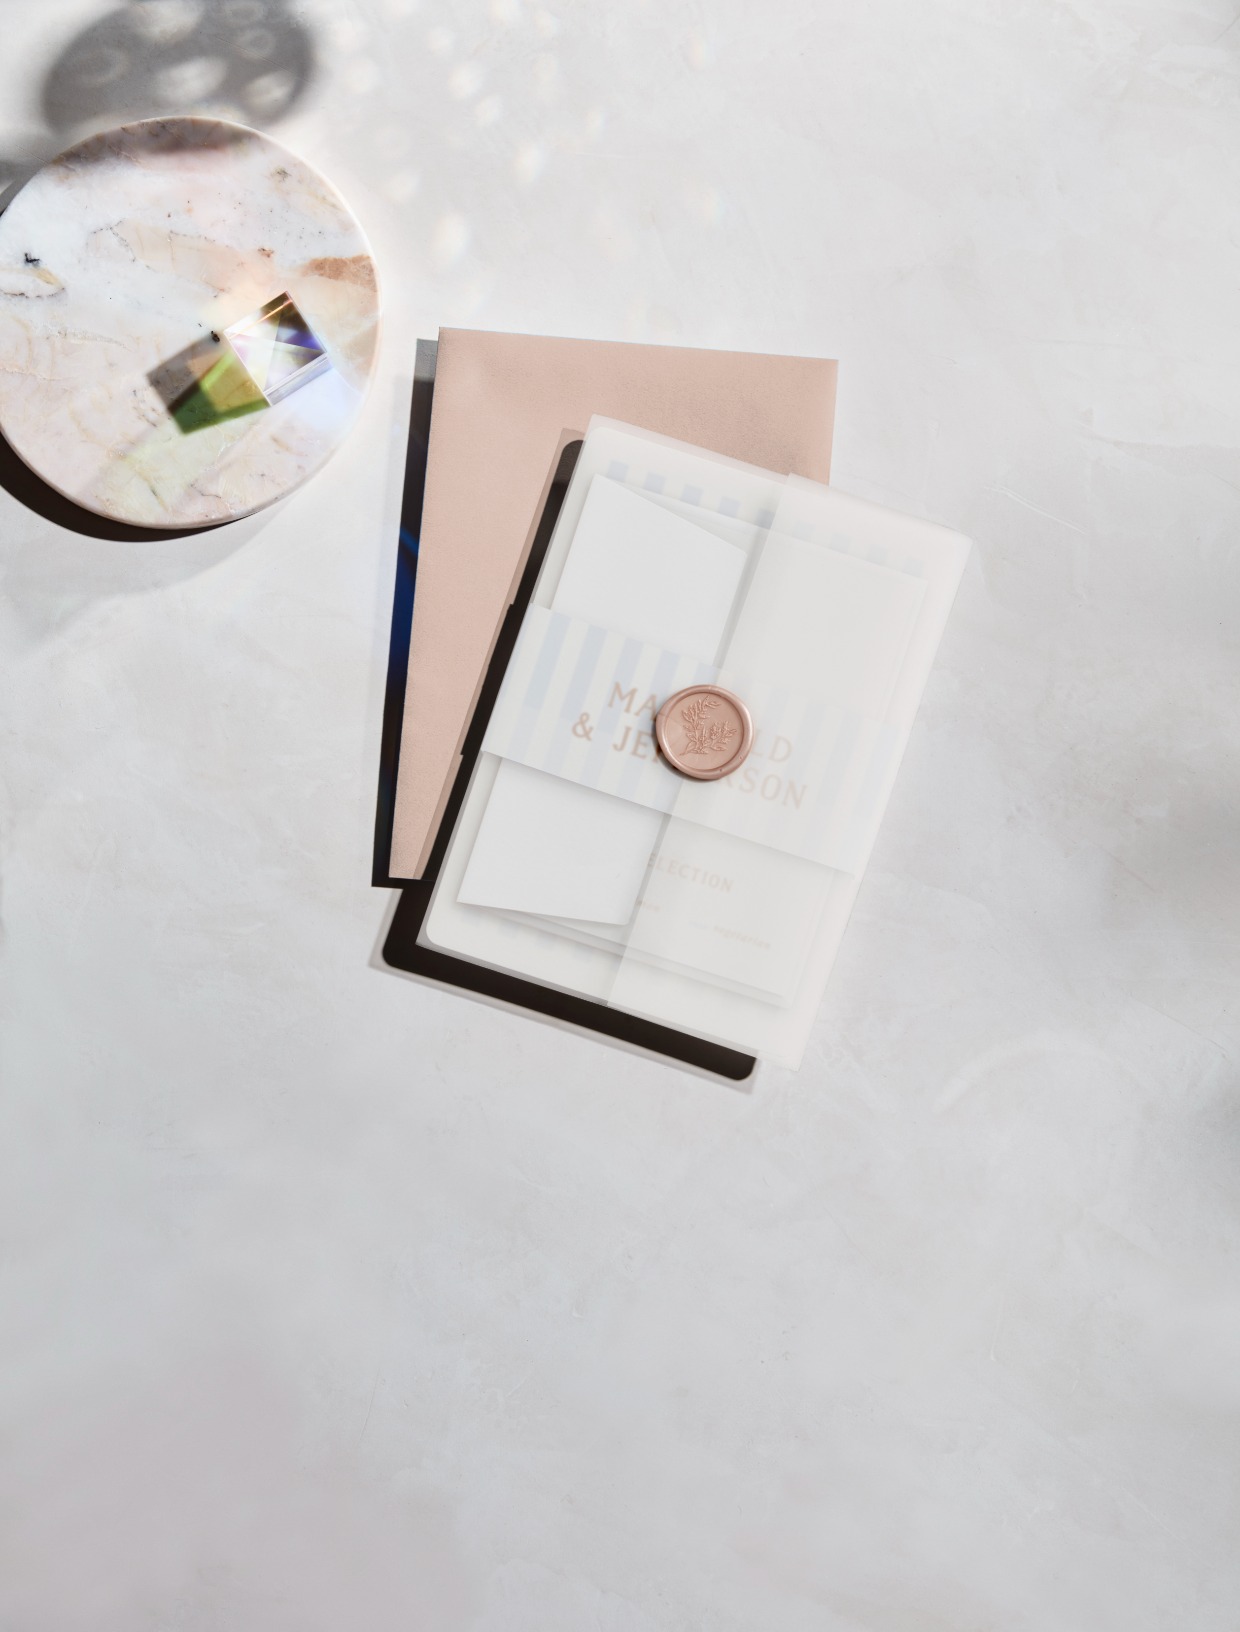 Pink wax seal from Minted